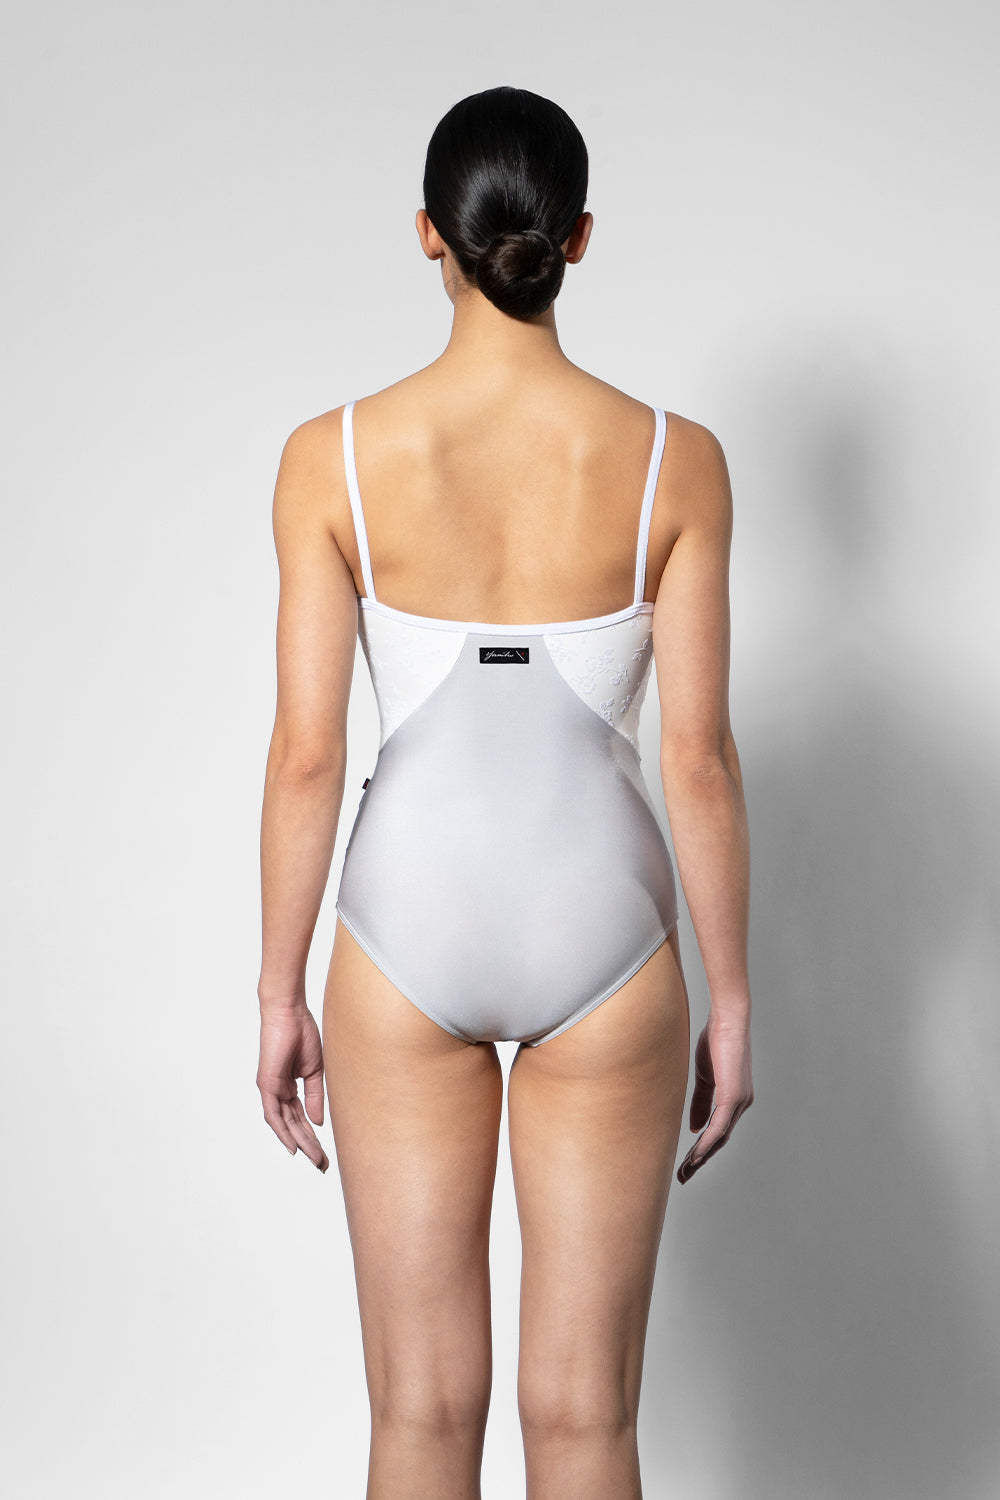 Amanda Black Label leotard in N-Silver body color with Sparkling Ivory top and V-White trim color